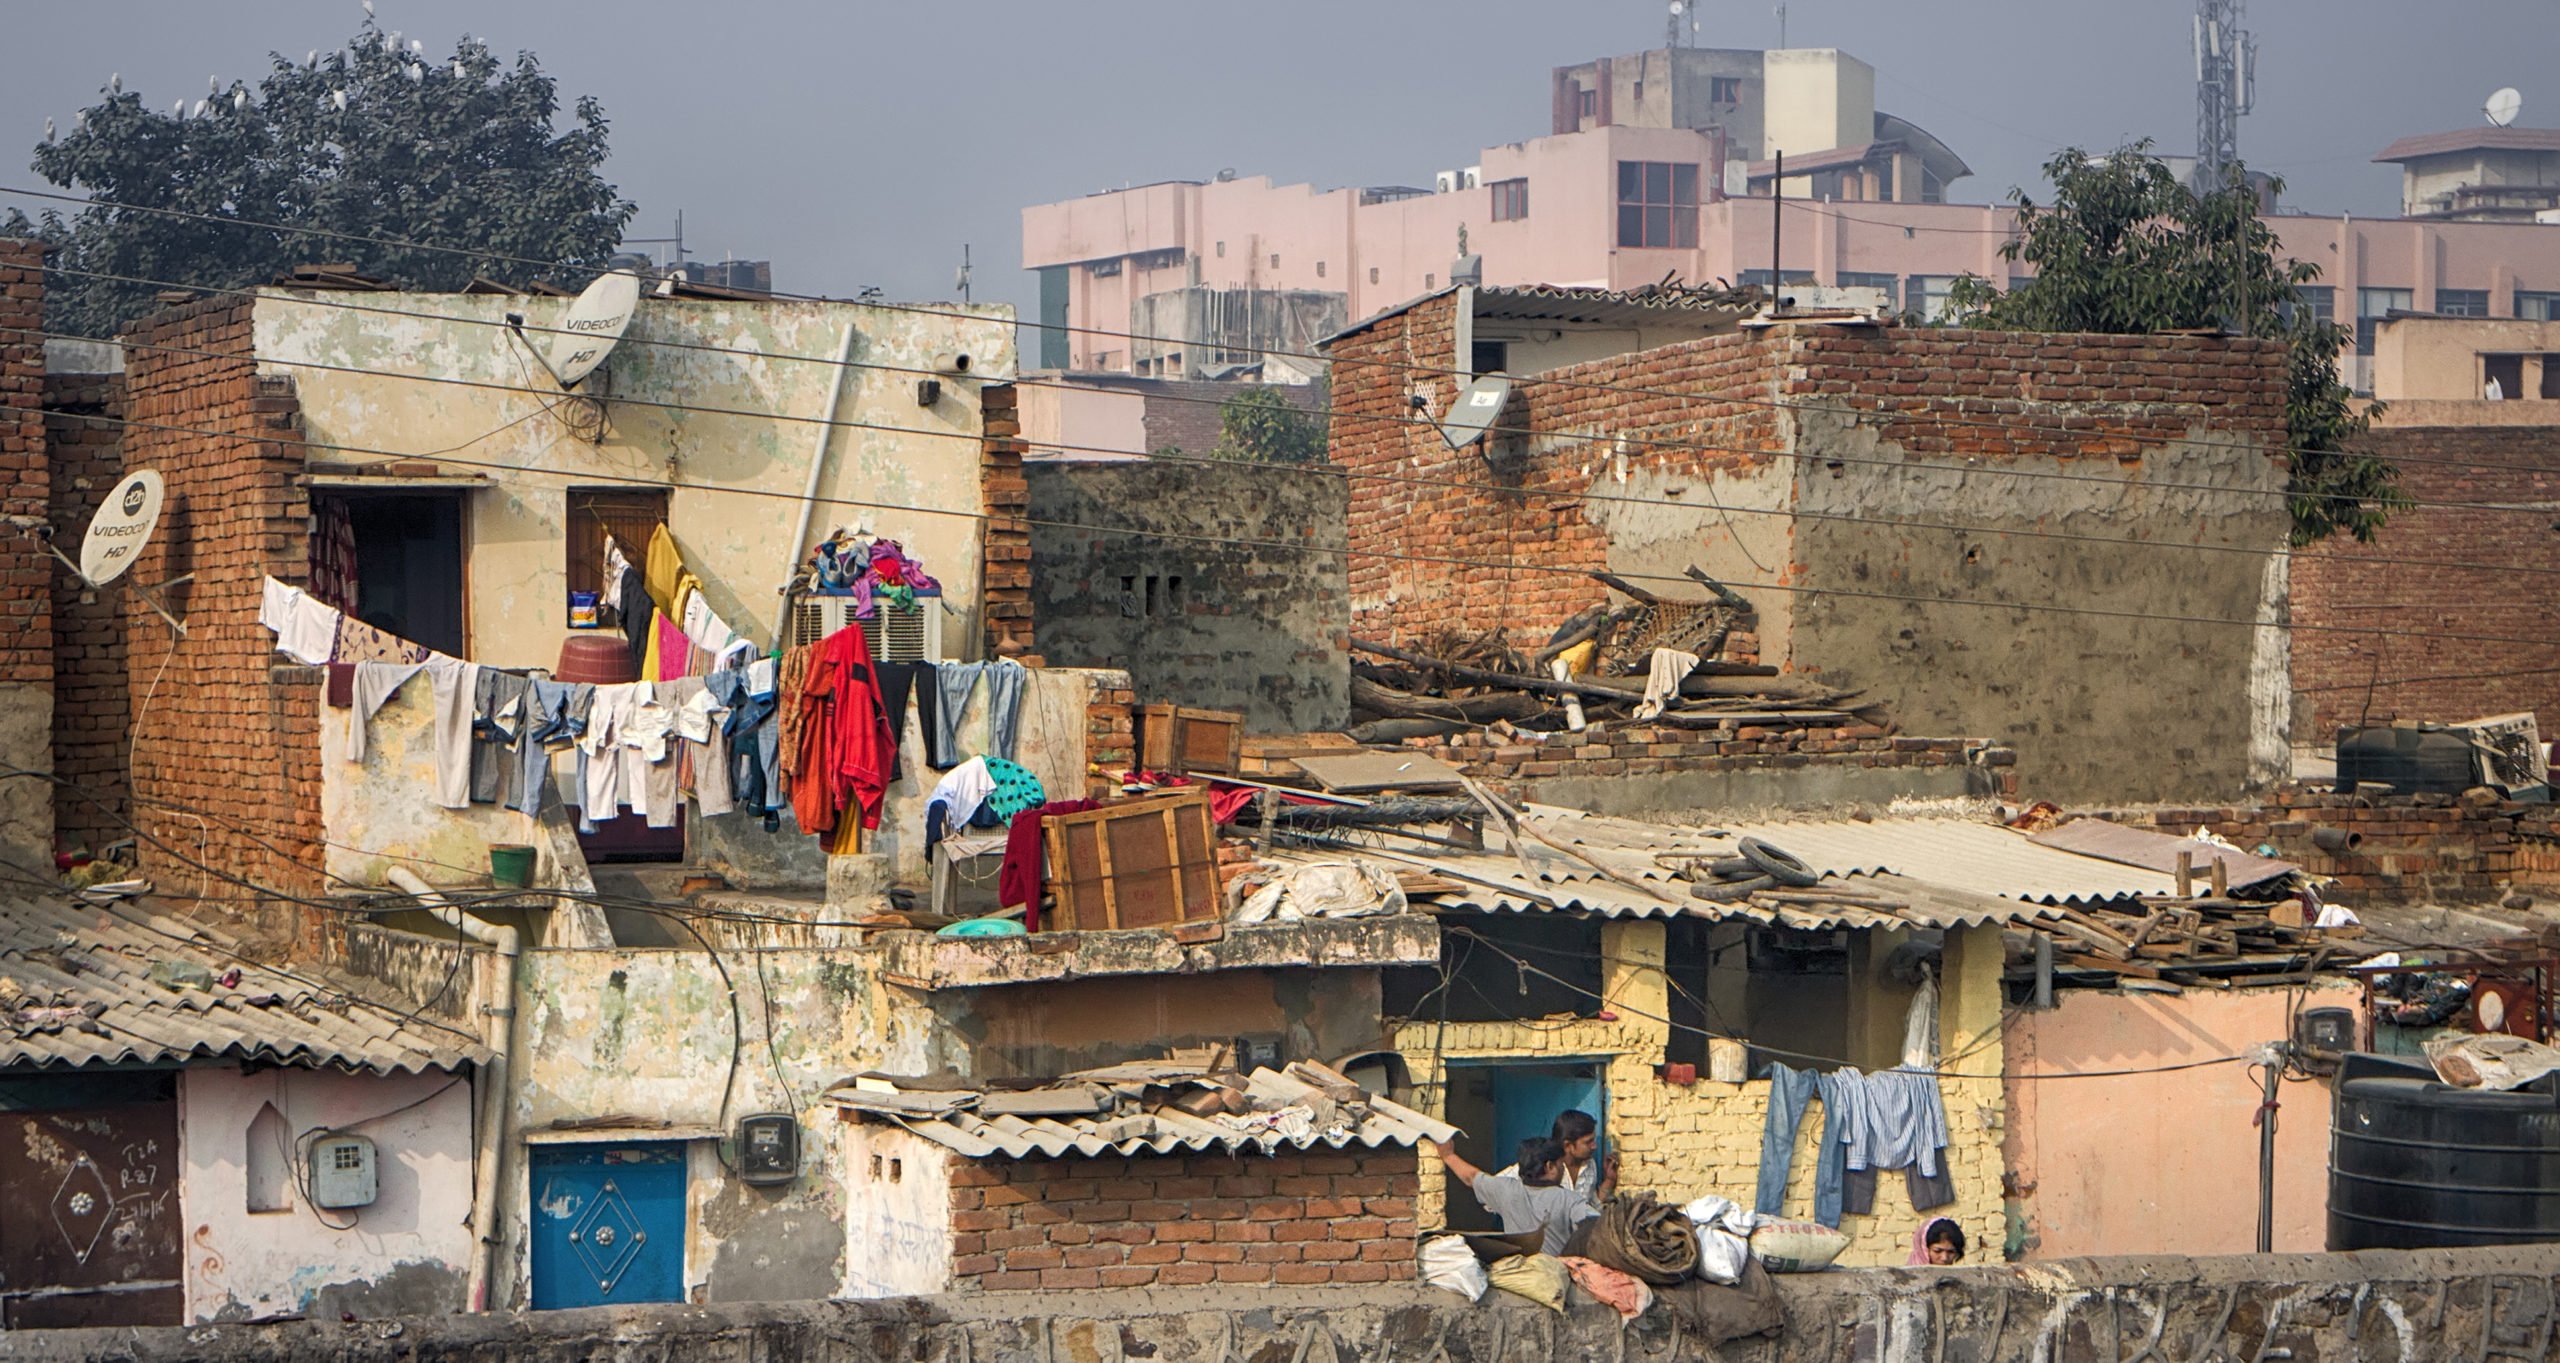 Visit Small Scale Industries And Small Residences In Our Delhi Slum Tour